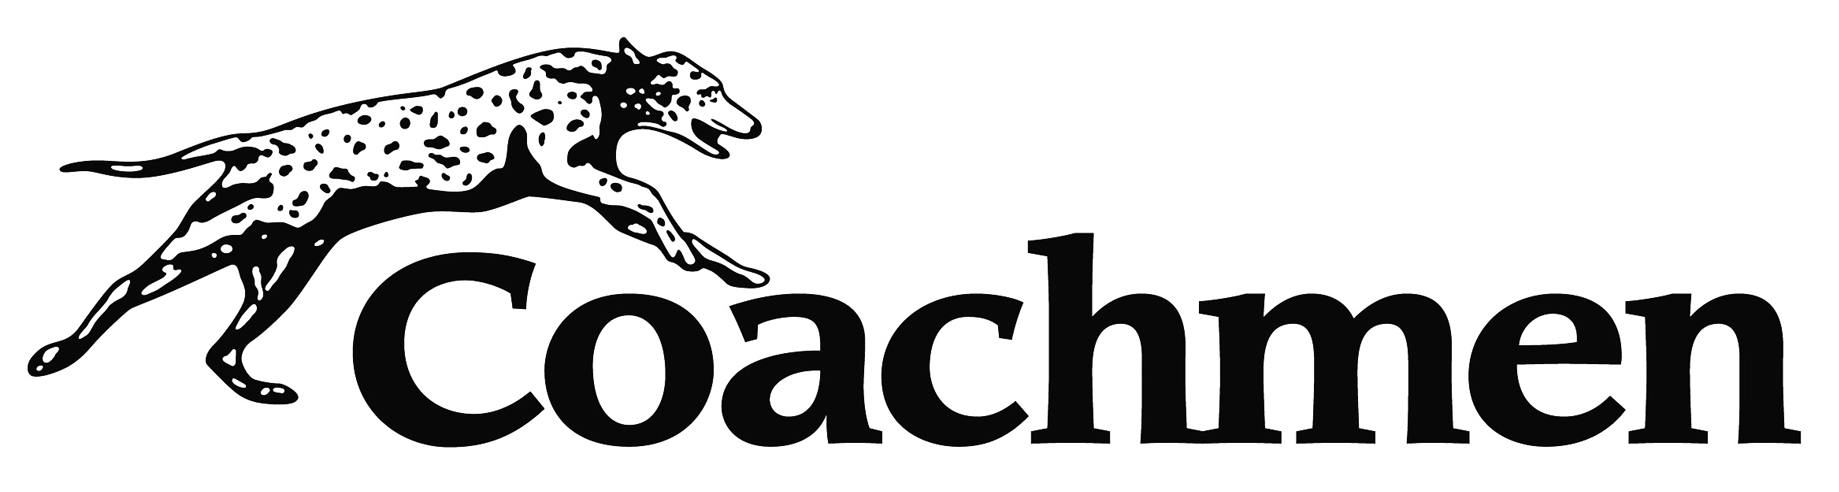 "Black and white Coachmen logo with a leaping greyhound silhouette."